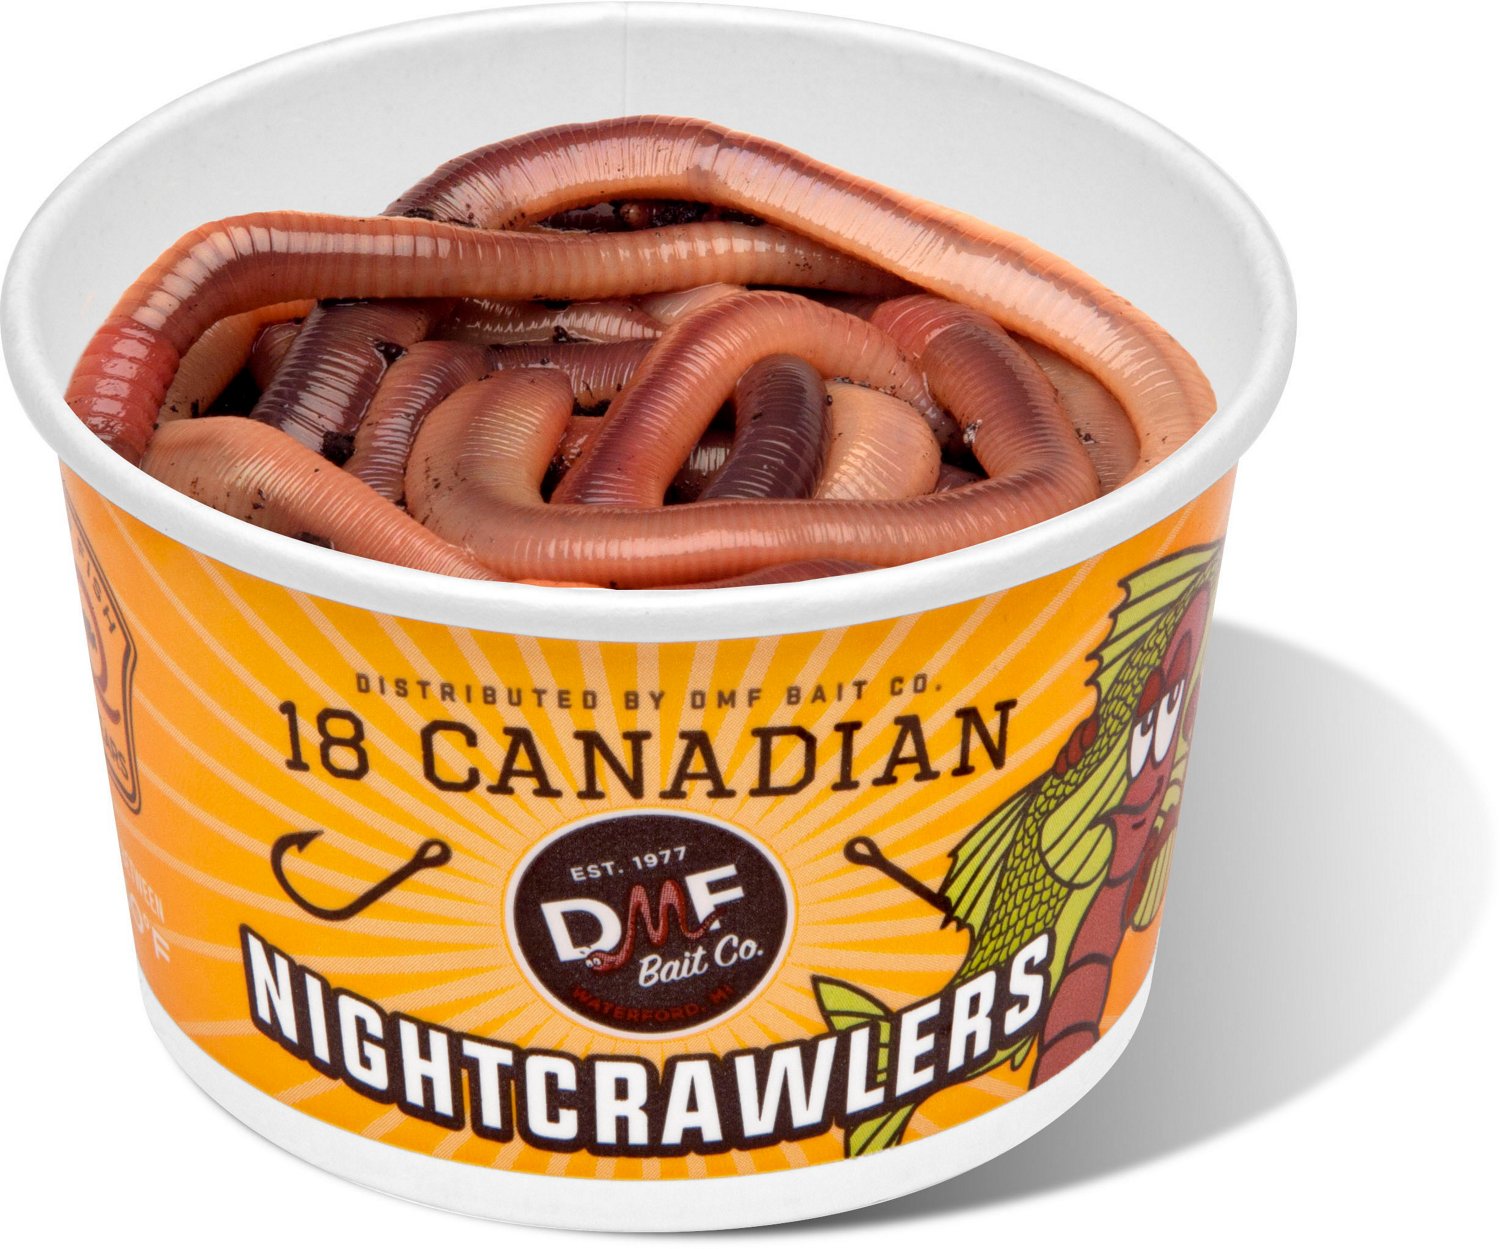  500 Big Canadian Nightcrawler Worms for Fishing in (2 Bags) by  US Worm Supply. Live delivery Guaranteed by The World's Largest Supplier of Live  Bait. : Sports & Outdoors